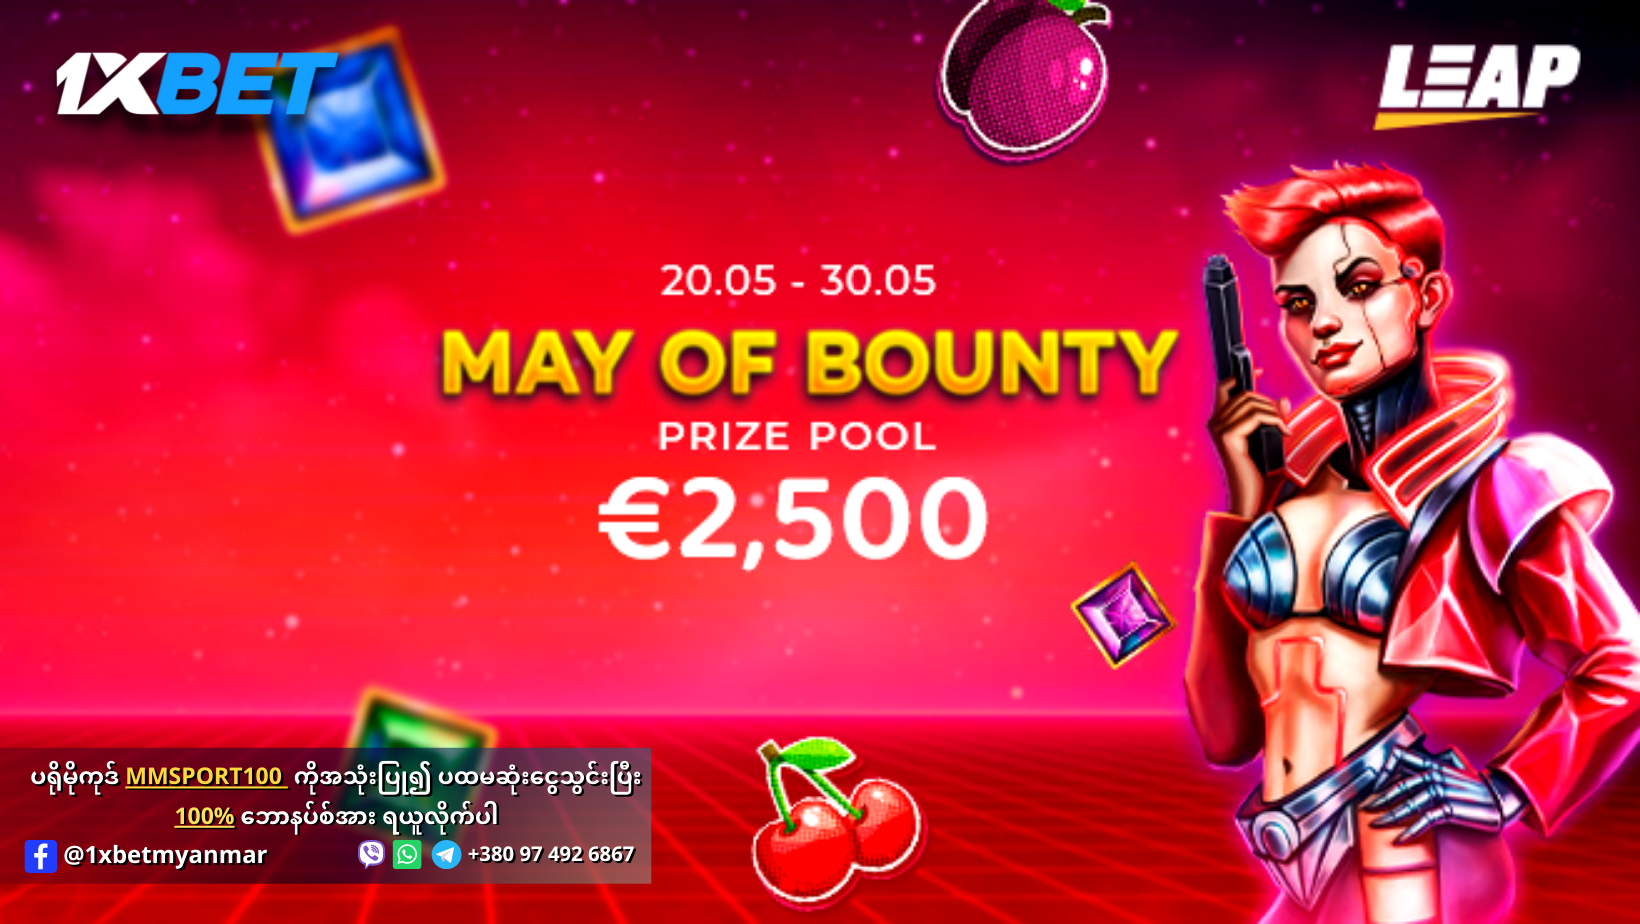 1xBet May Of Bounty Promotion